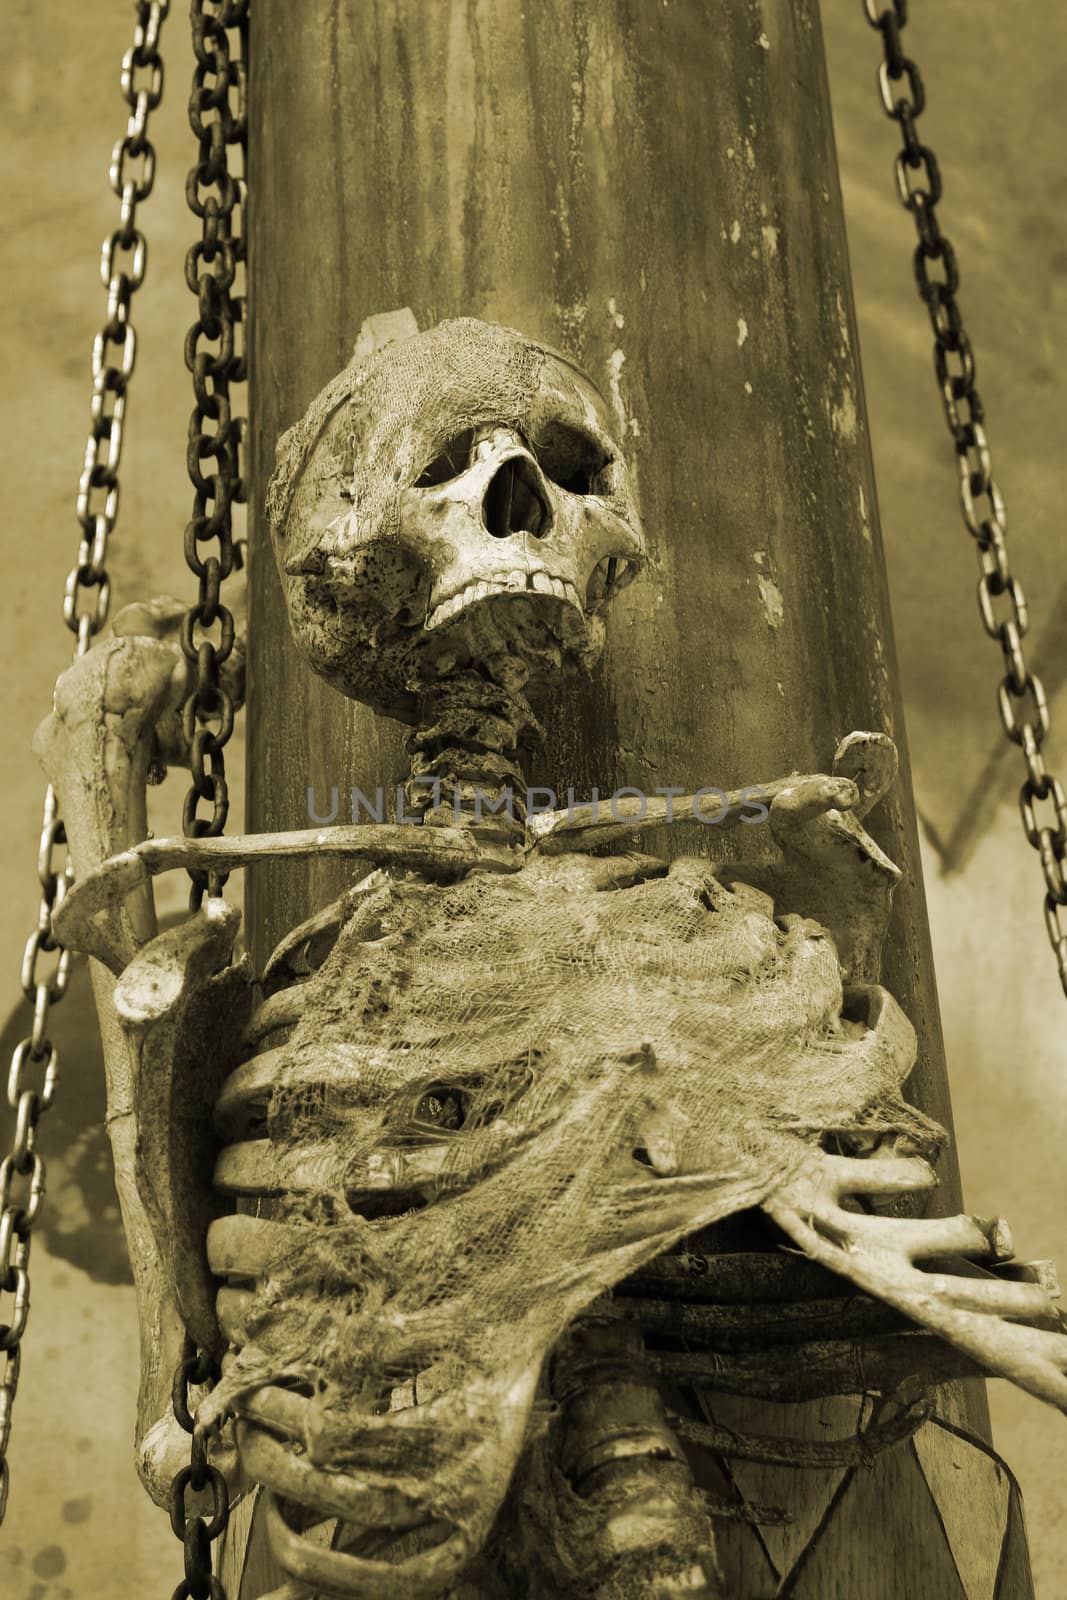 Chained up skeleton in sepia tone